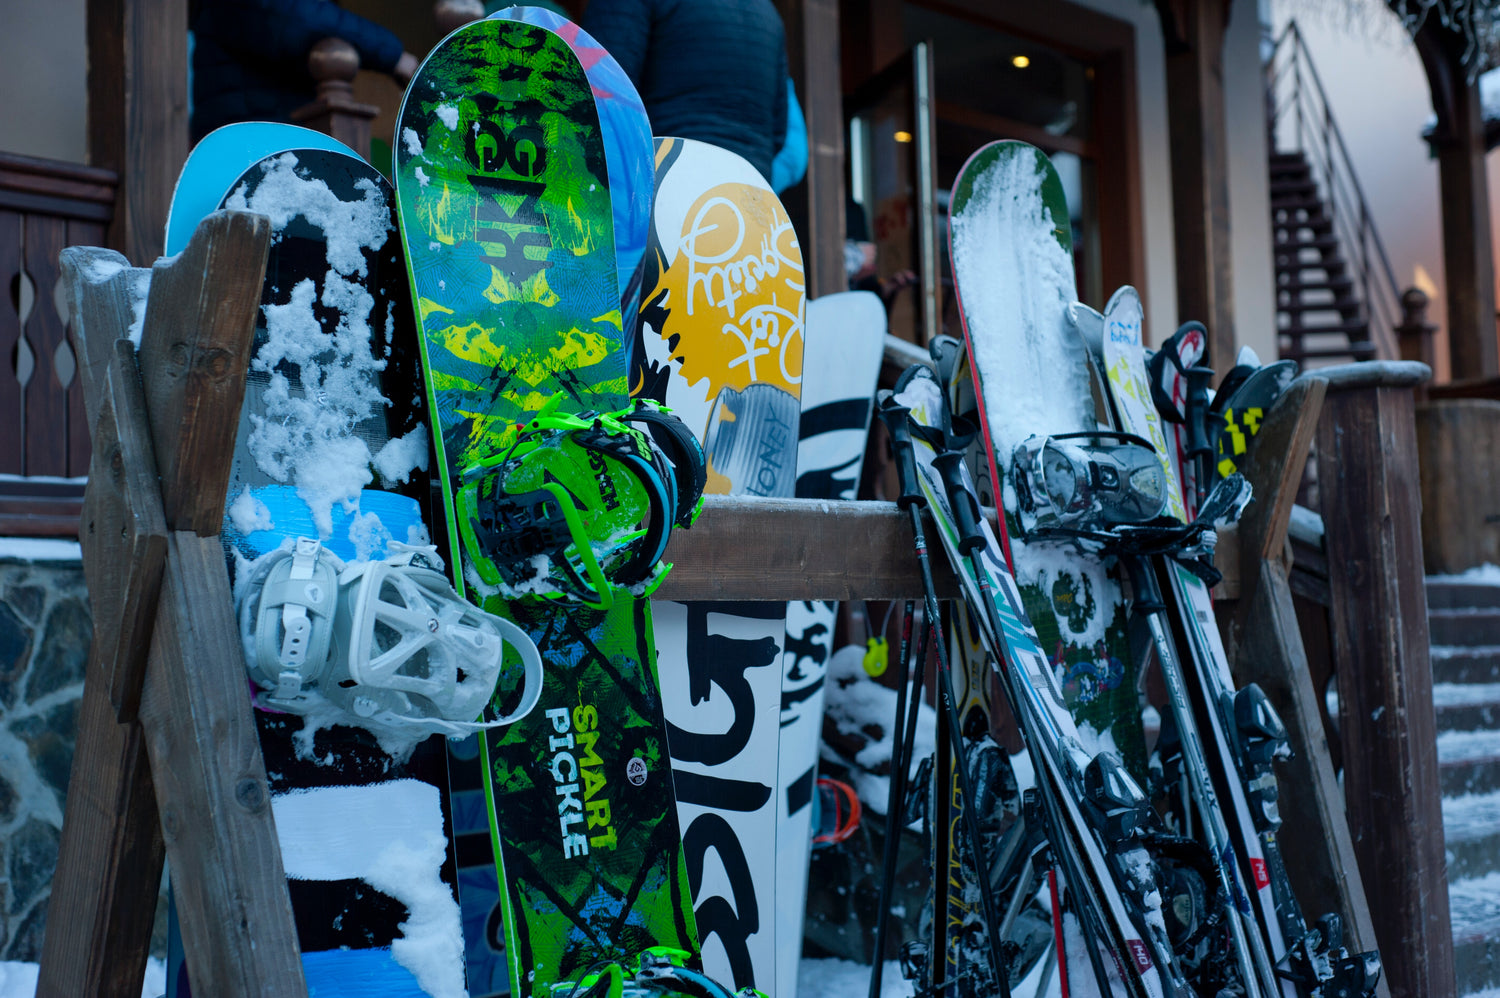 How to Wax Skiis and Snowboards at Home, Campus Recreation